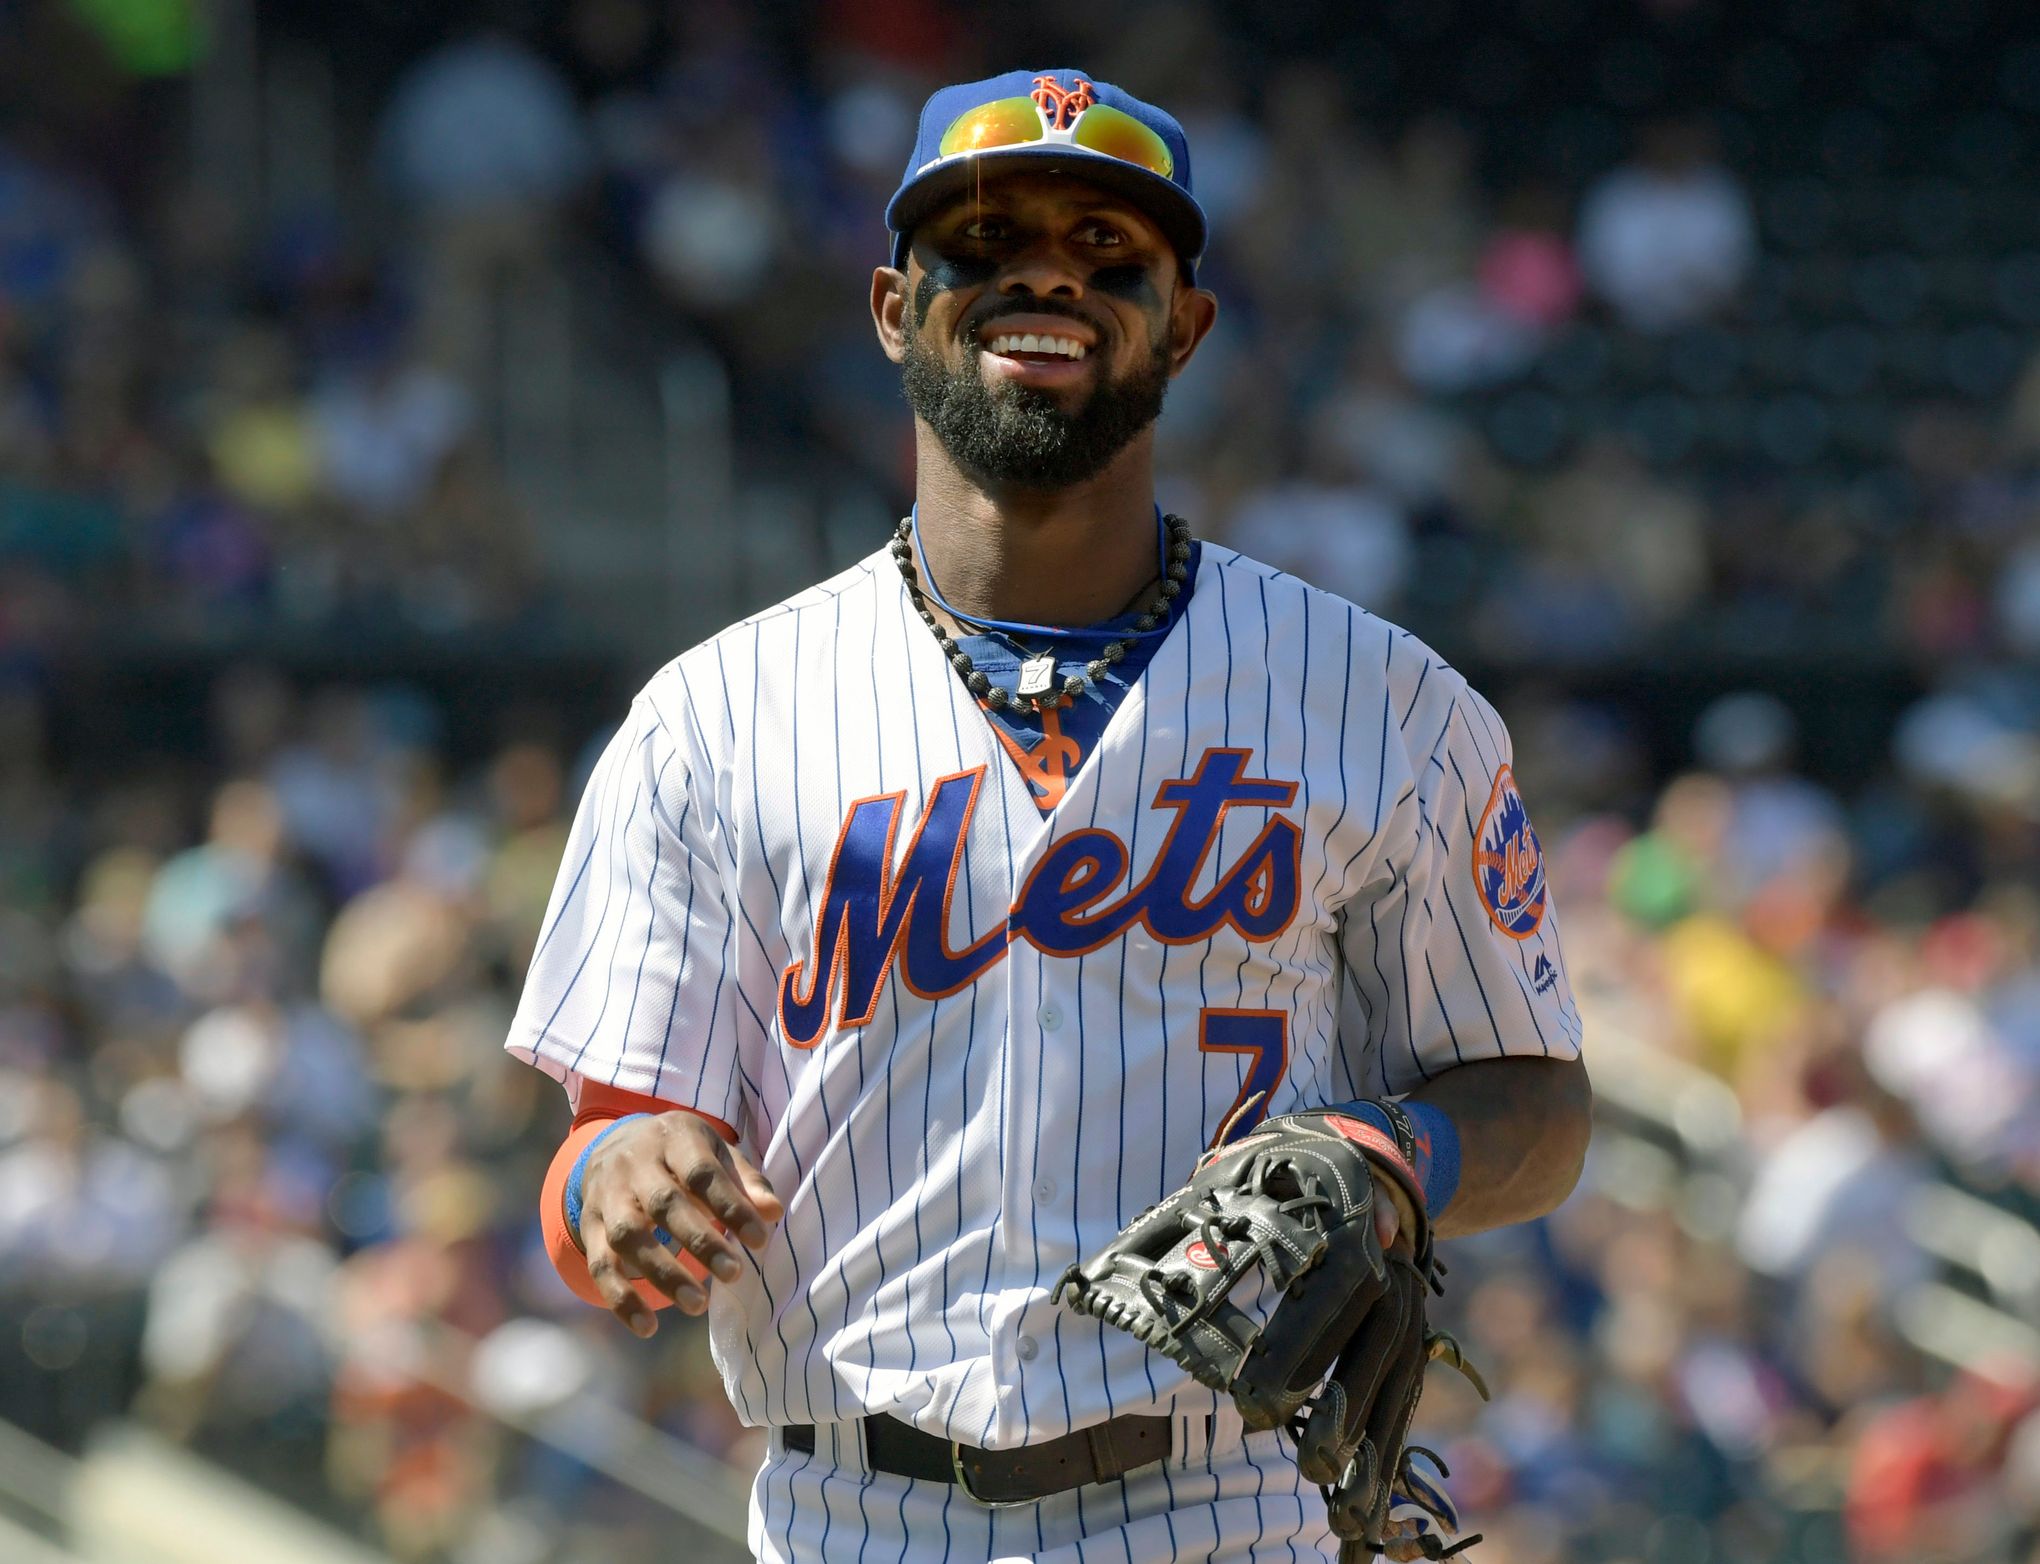 José Reyes, 4-time All-Star shortstop, retires at age 37